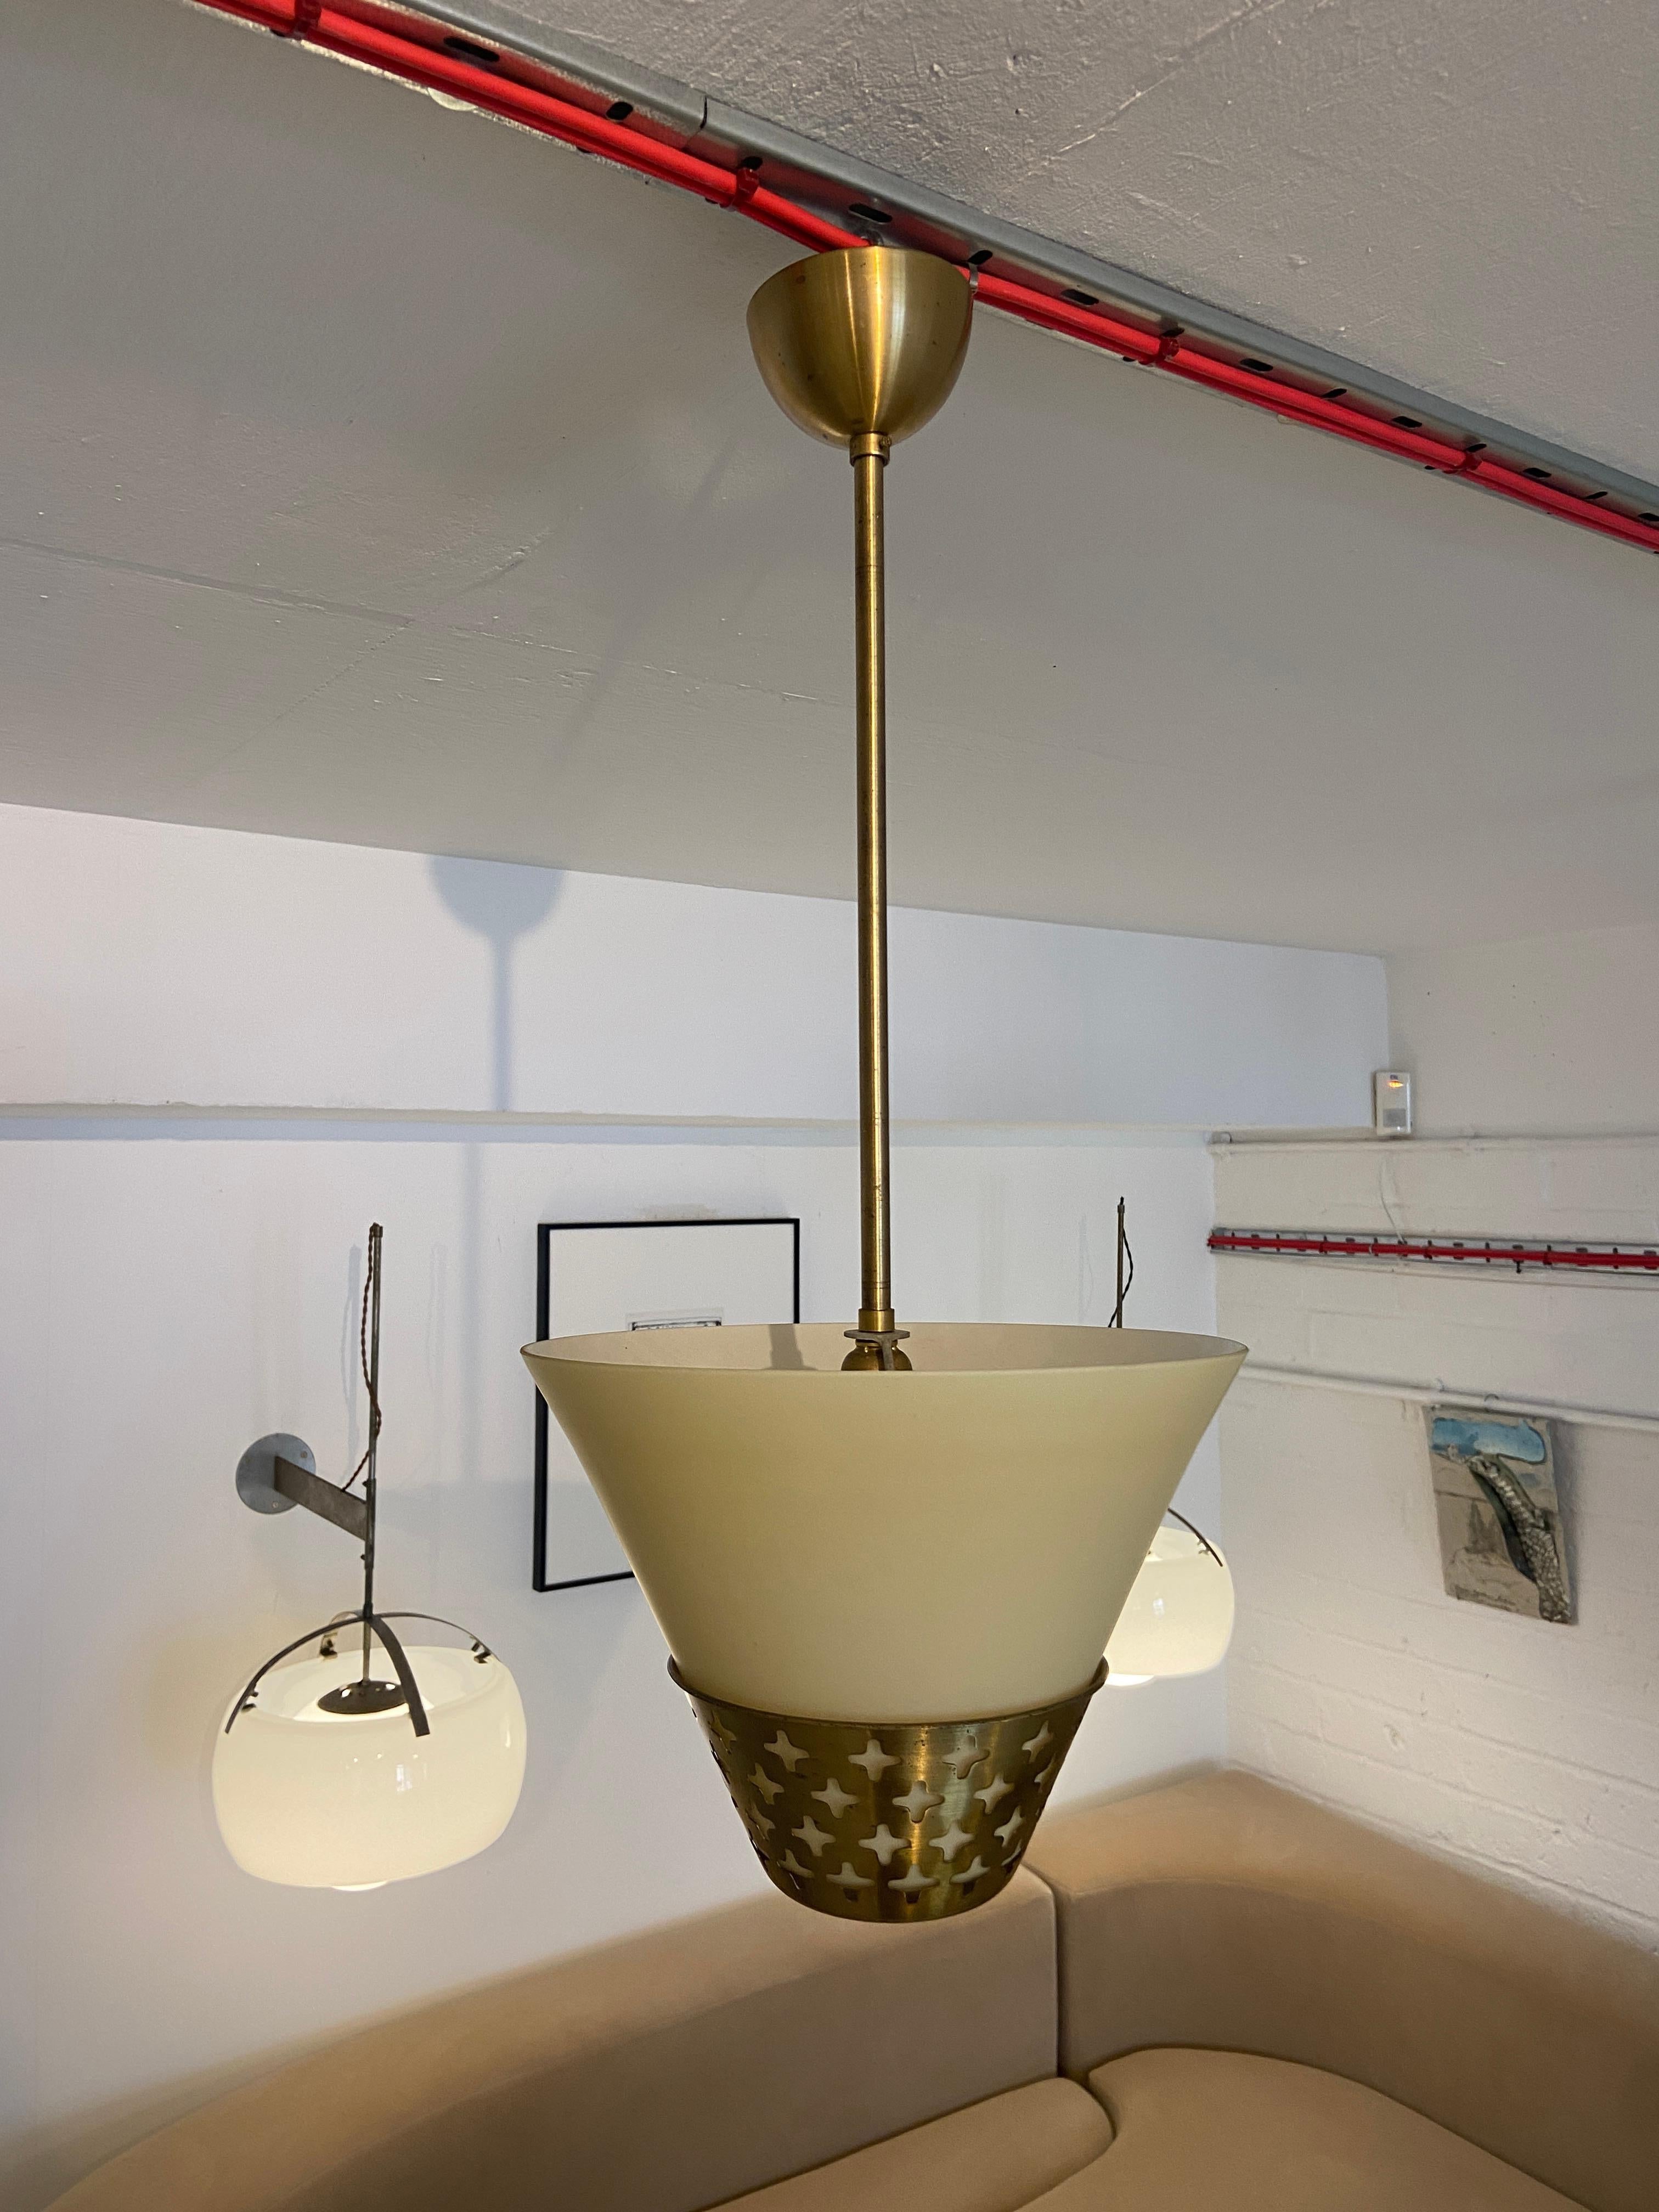 This exquisite pendant light is a harmonious blend of modern aesthetics and impeccable craftsmanship. Featuring a sleek and ornamental design crafted from finely pierced brass, it exudes an air of elegance and sophistication that is sure to elevate